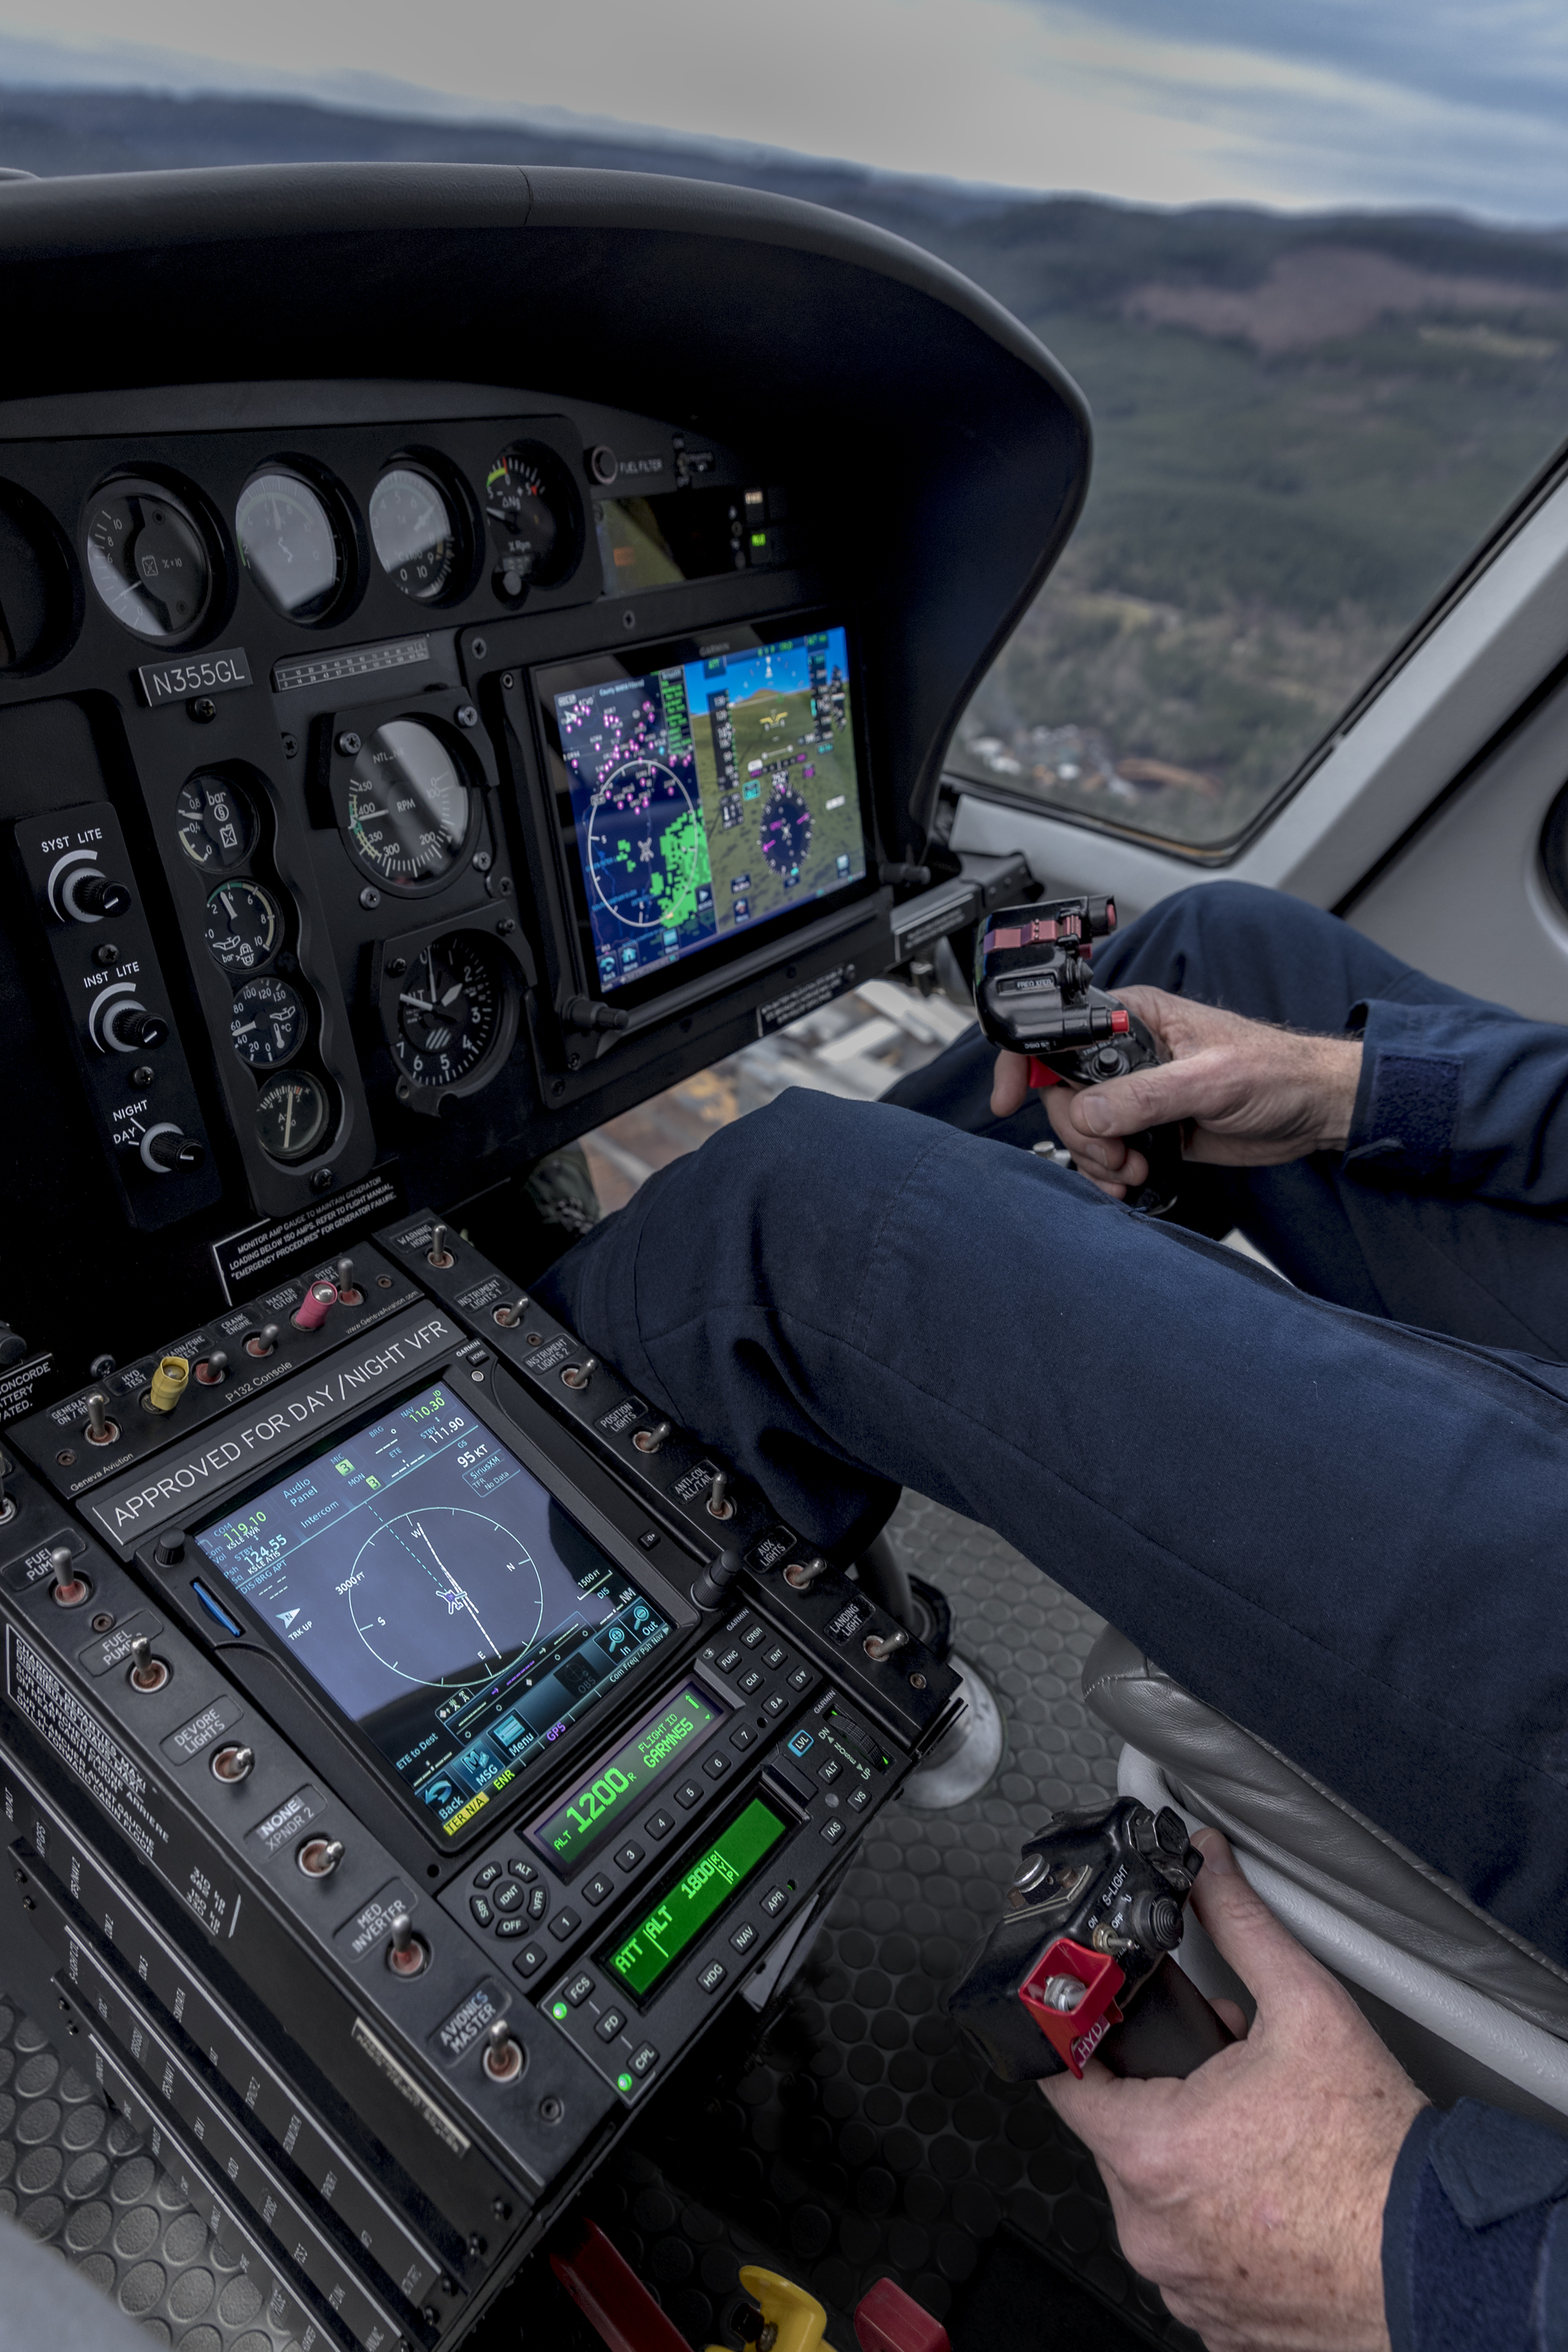 The GFC 600H includes stability augmentation system that provides inputs to help stabilize the helicopter while hand-flying. Garmin Photo